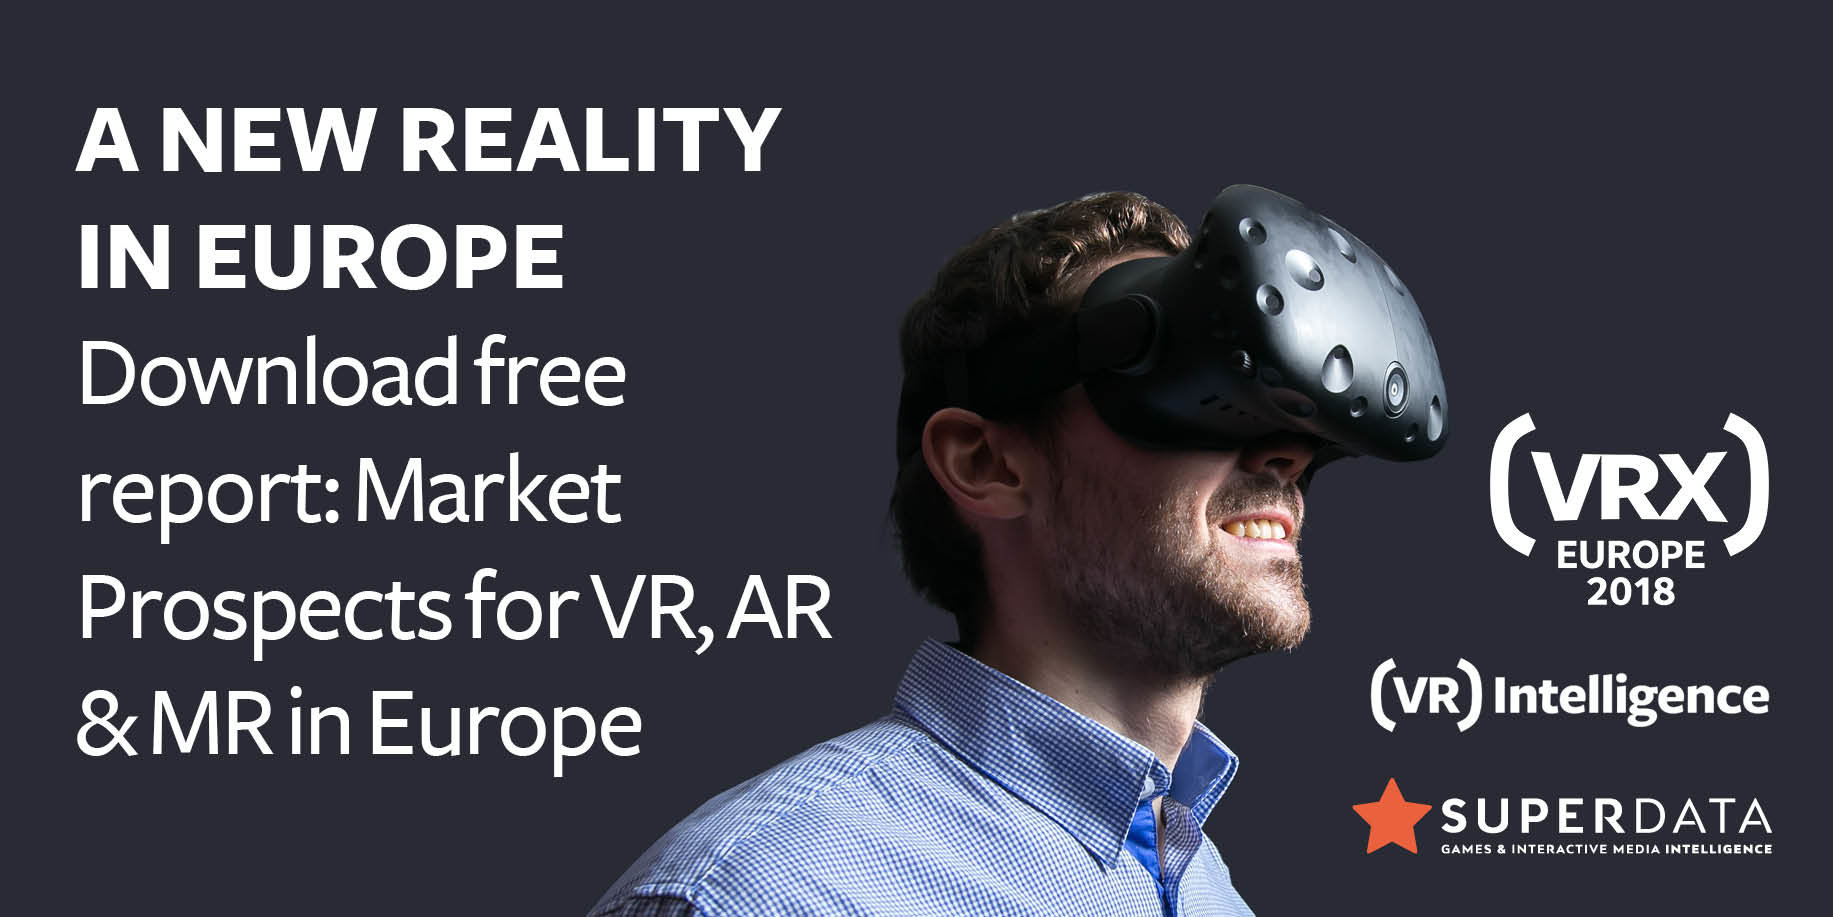 VR Intelligence Report Showing Growth in Europe